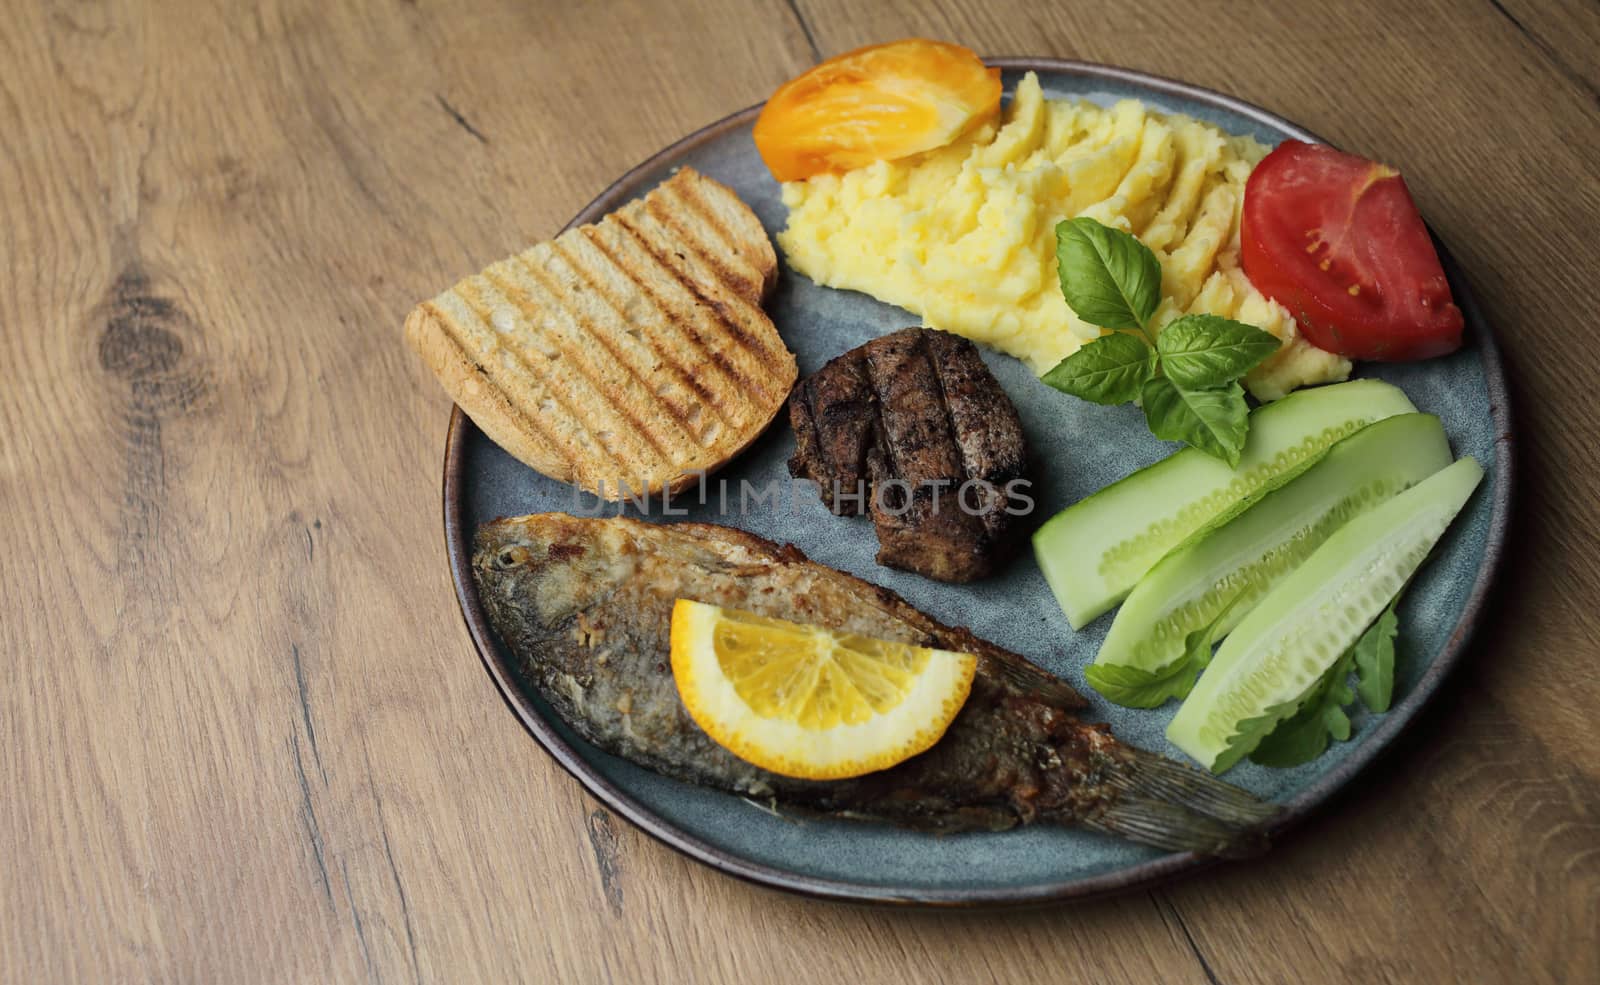 Fried fish, meat steak and vegetables on a plate. On a wooden table by selinsmo